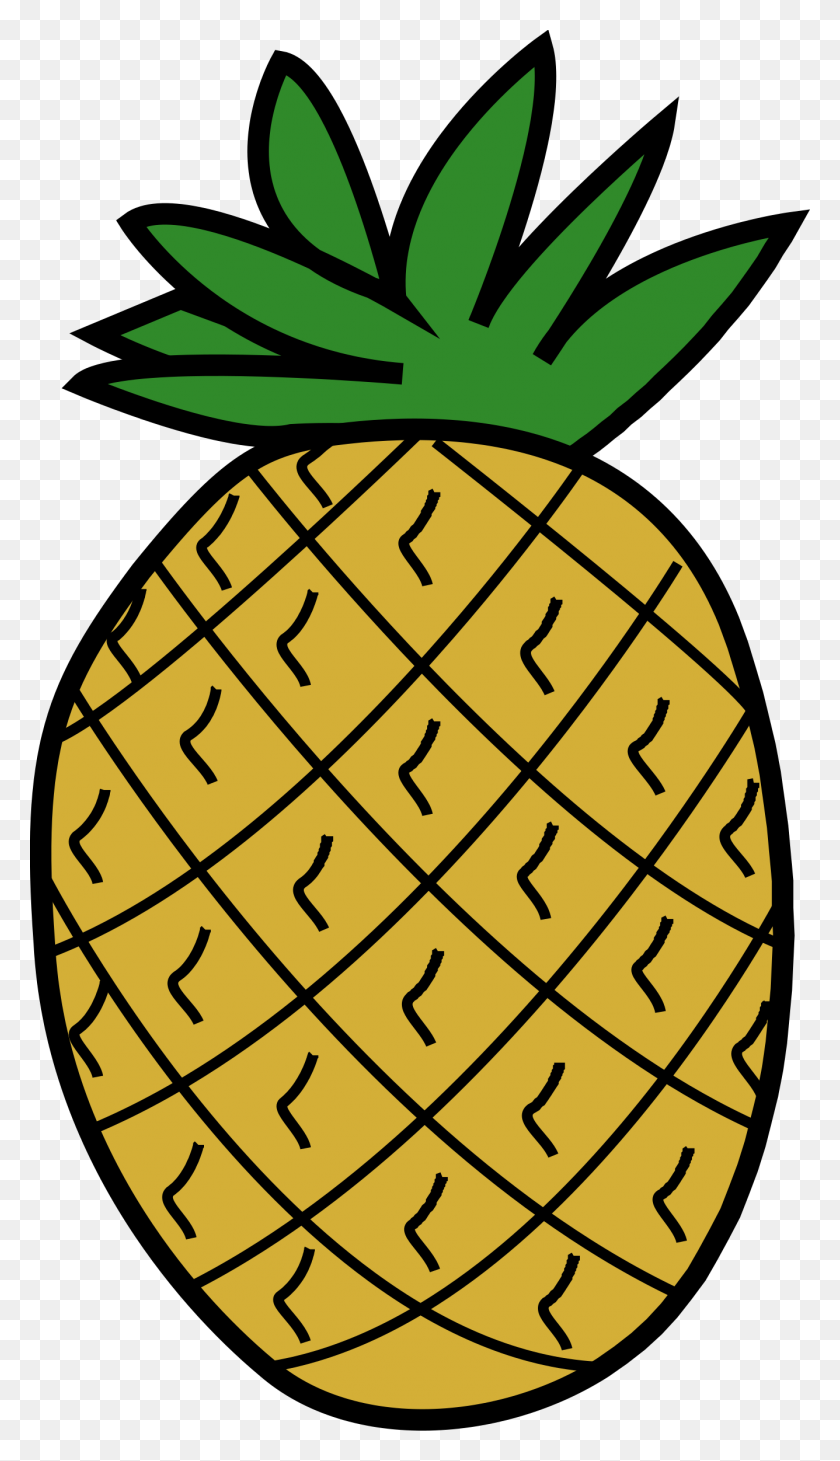 1336x2400 Pineapple Icons Png - Pineapple PNG